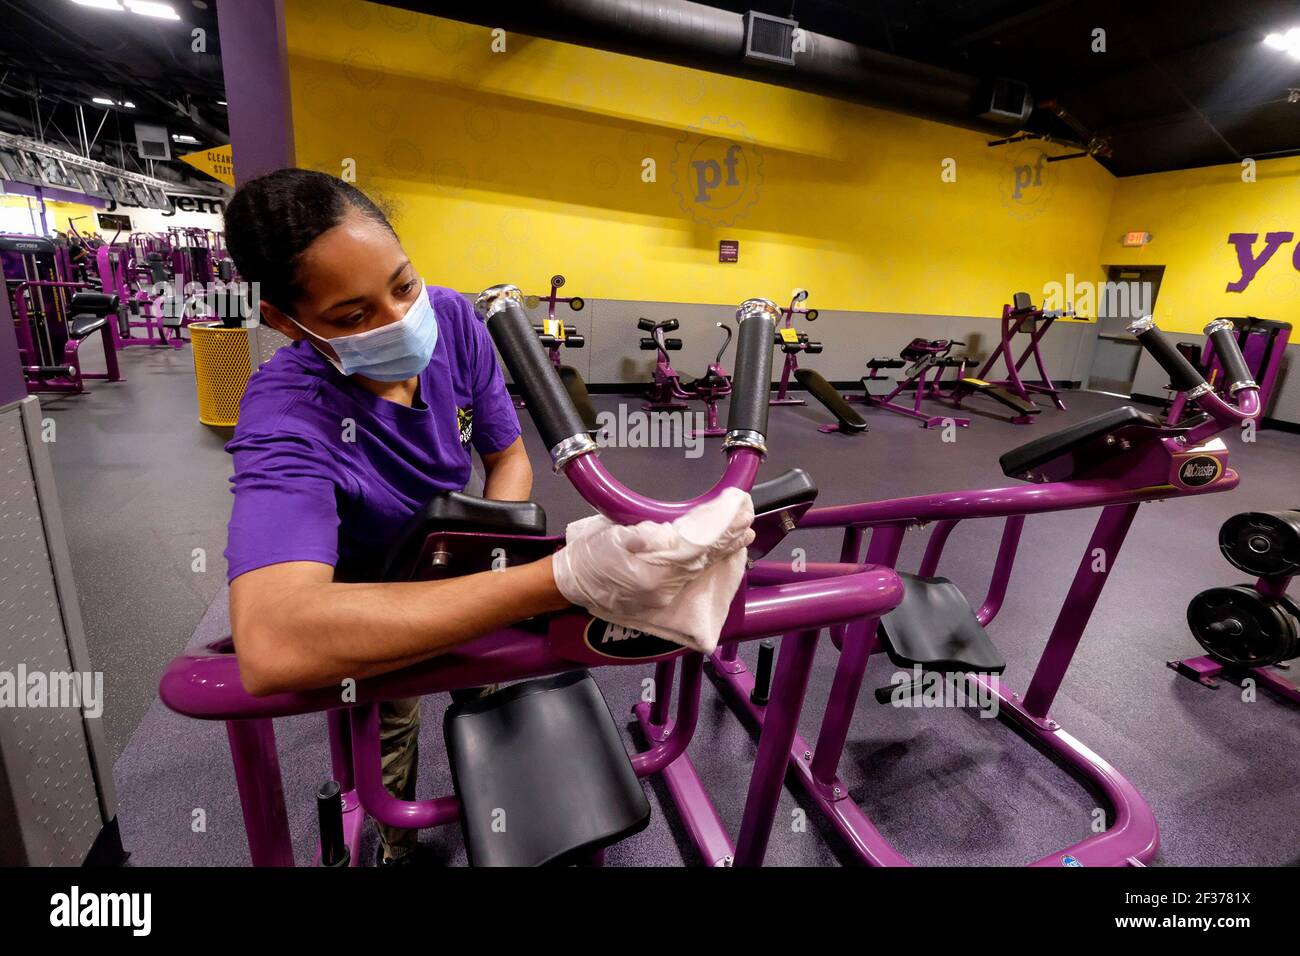 https://c8.alamy.com/comp/2F3781X/los-angeles-california-usa-15th-mar-2021-a-planet-fitness-staff-cleans-gym-equipment-to-prepare-the-reopening-after-being-closed-due-to-covid-19-pandemic-in-inglewood-california-on-march-15-2021-los-angeles-county-restaurants-can-again-welcome-customers-indoors-and-movie-theaters-and-fitness-centers-are-able-to-reopenall-at-limited-capacity-with-the-county-advancing-today-to-the-less-restrictive-red-tier-of-the-states-blueprint-for-a-safer-economy-credit-ringo-chiuzuma-wirealamy-live-news-2F3781X.jpg